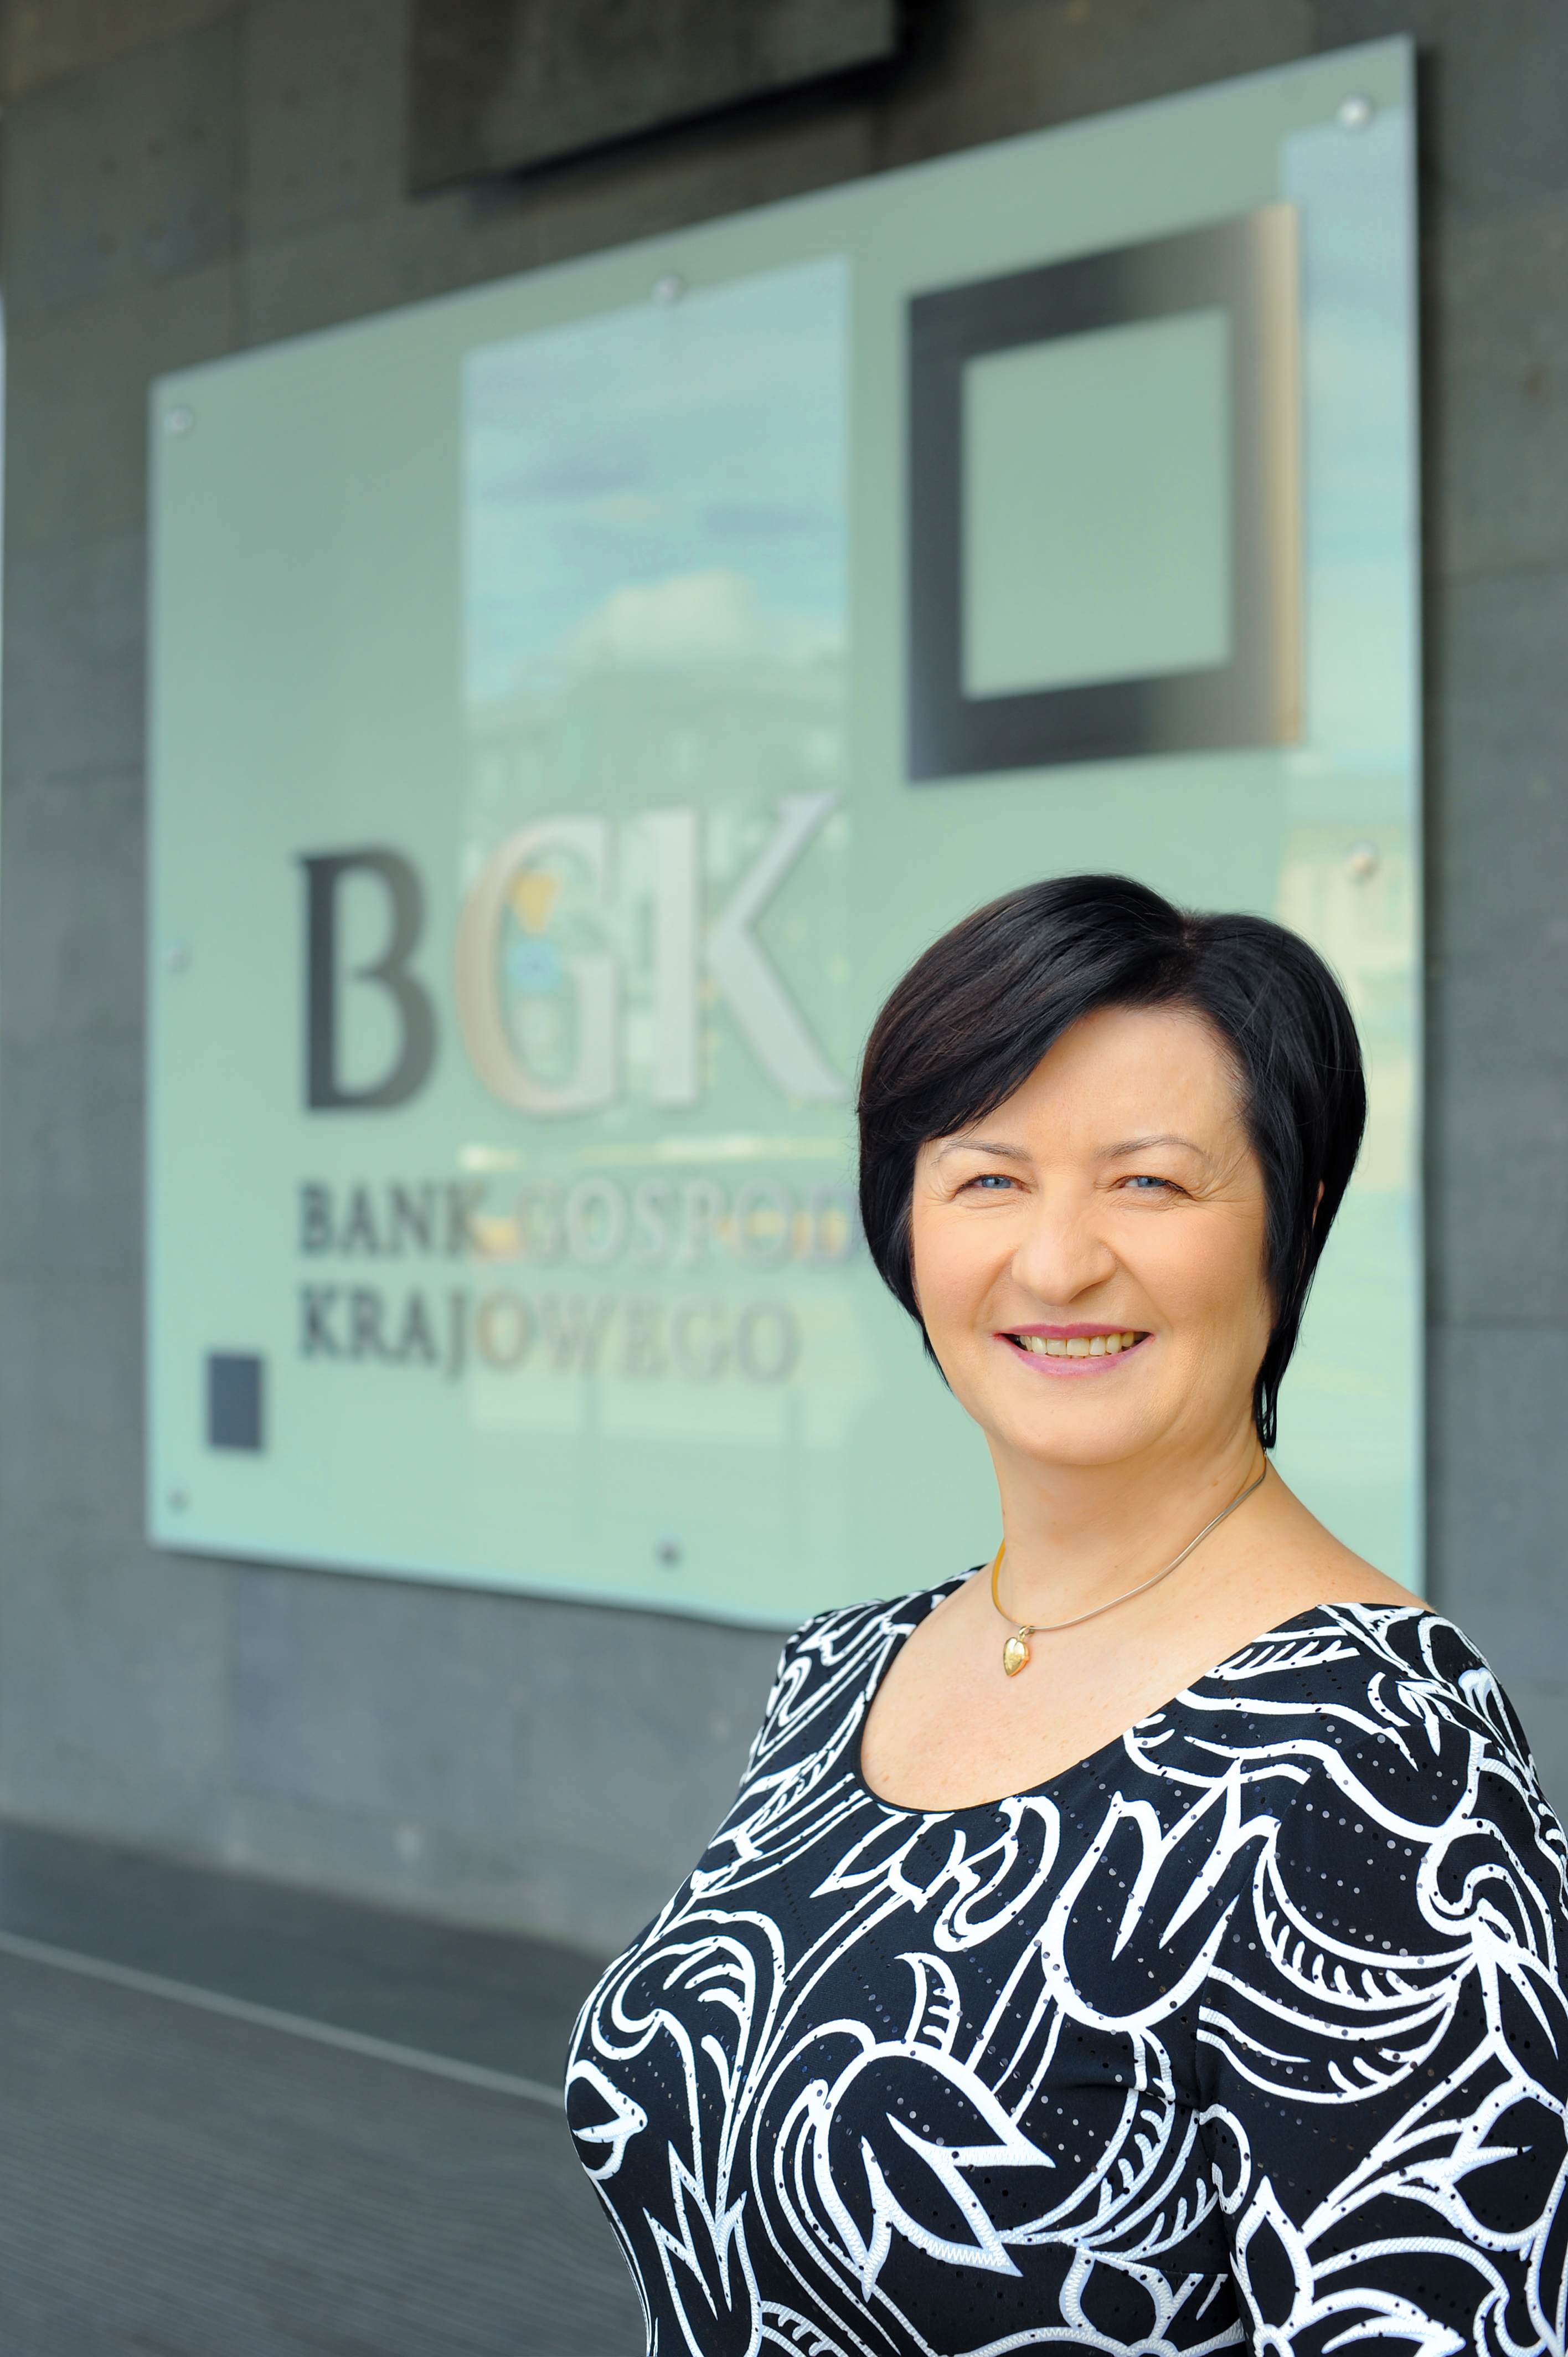 Jolanta Wiewióra, Managing Director of the HR and Communication Division